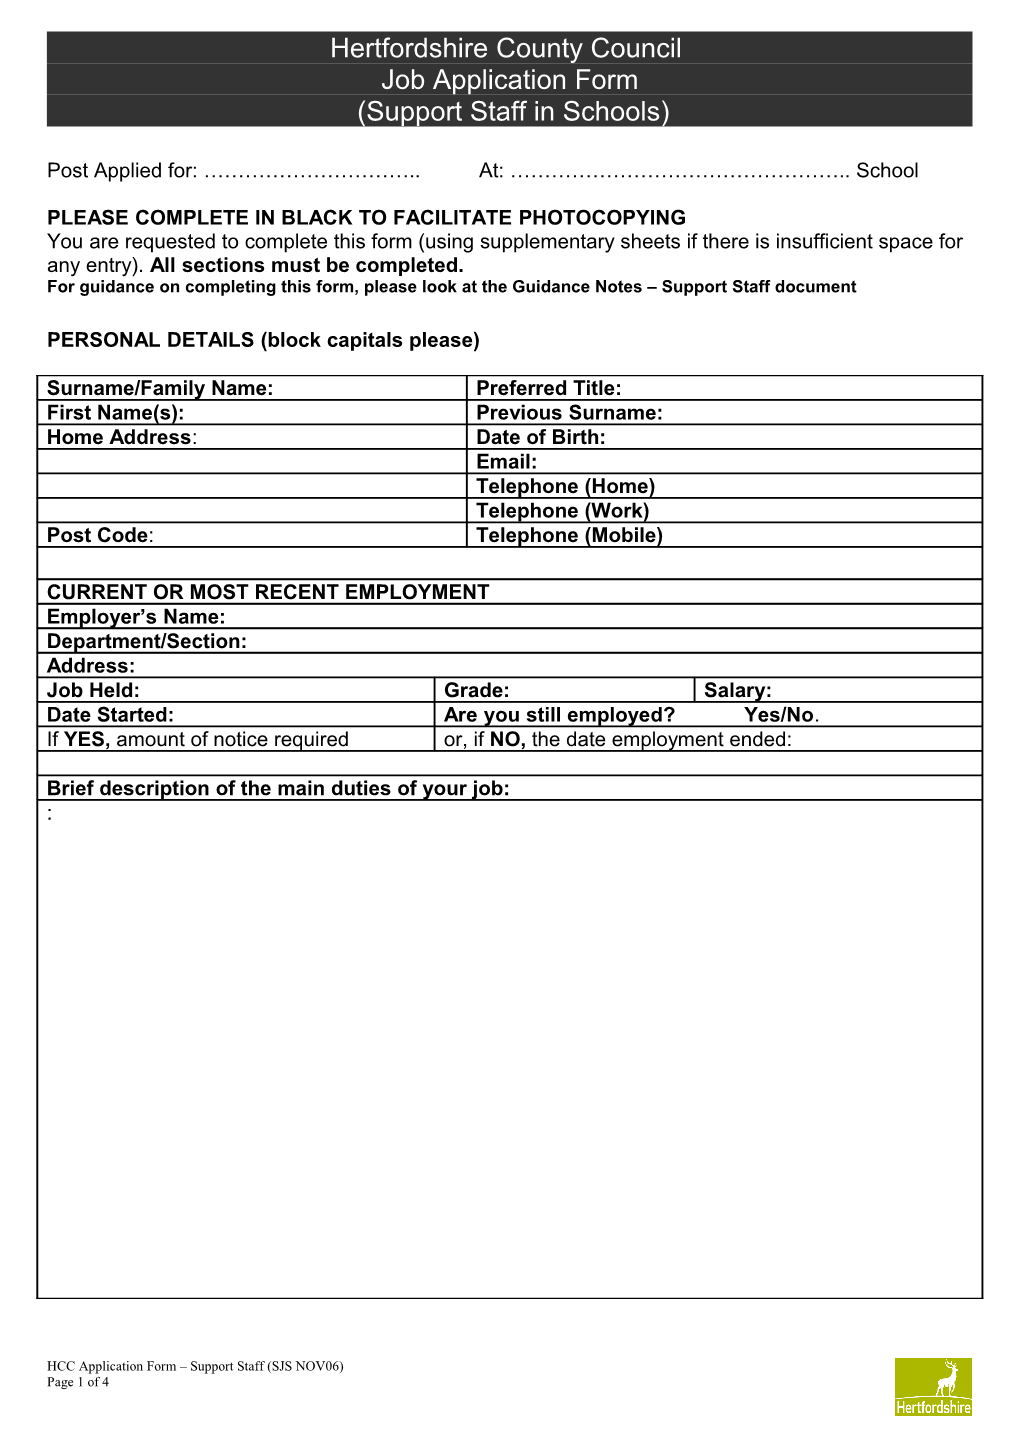 Hertfordshire County Council Job Application Form (Support Staff)